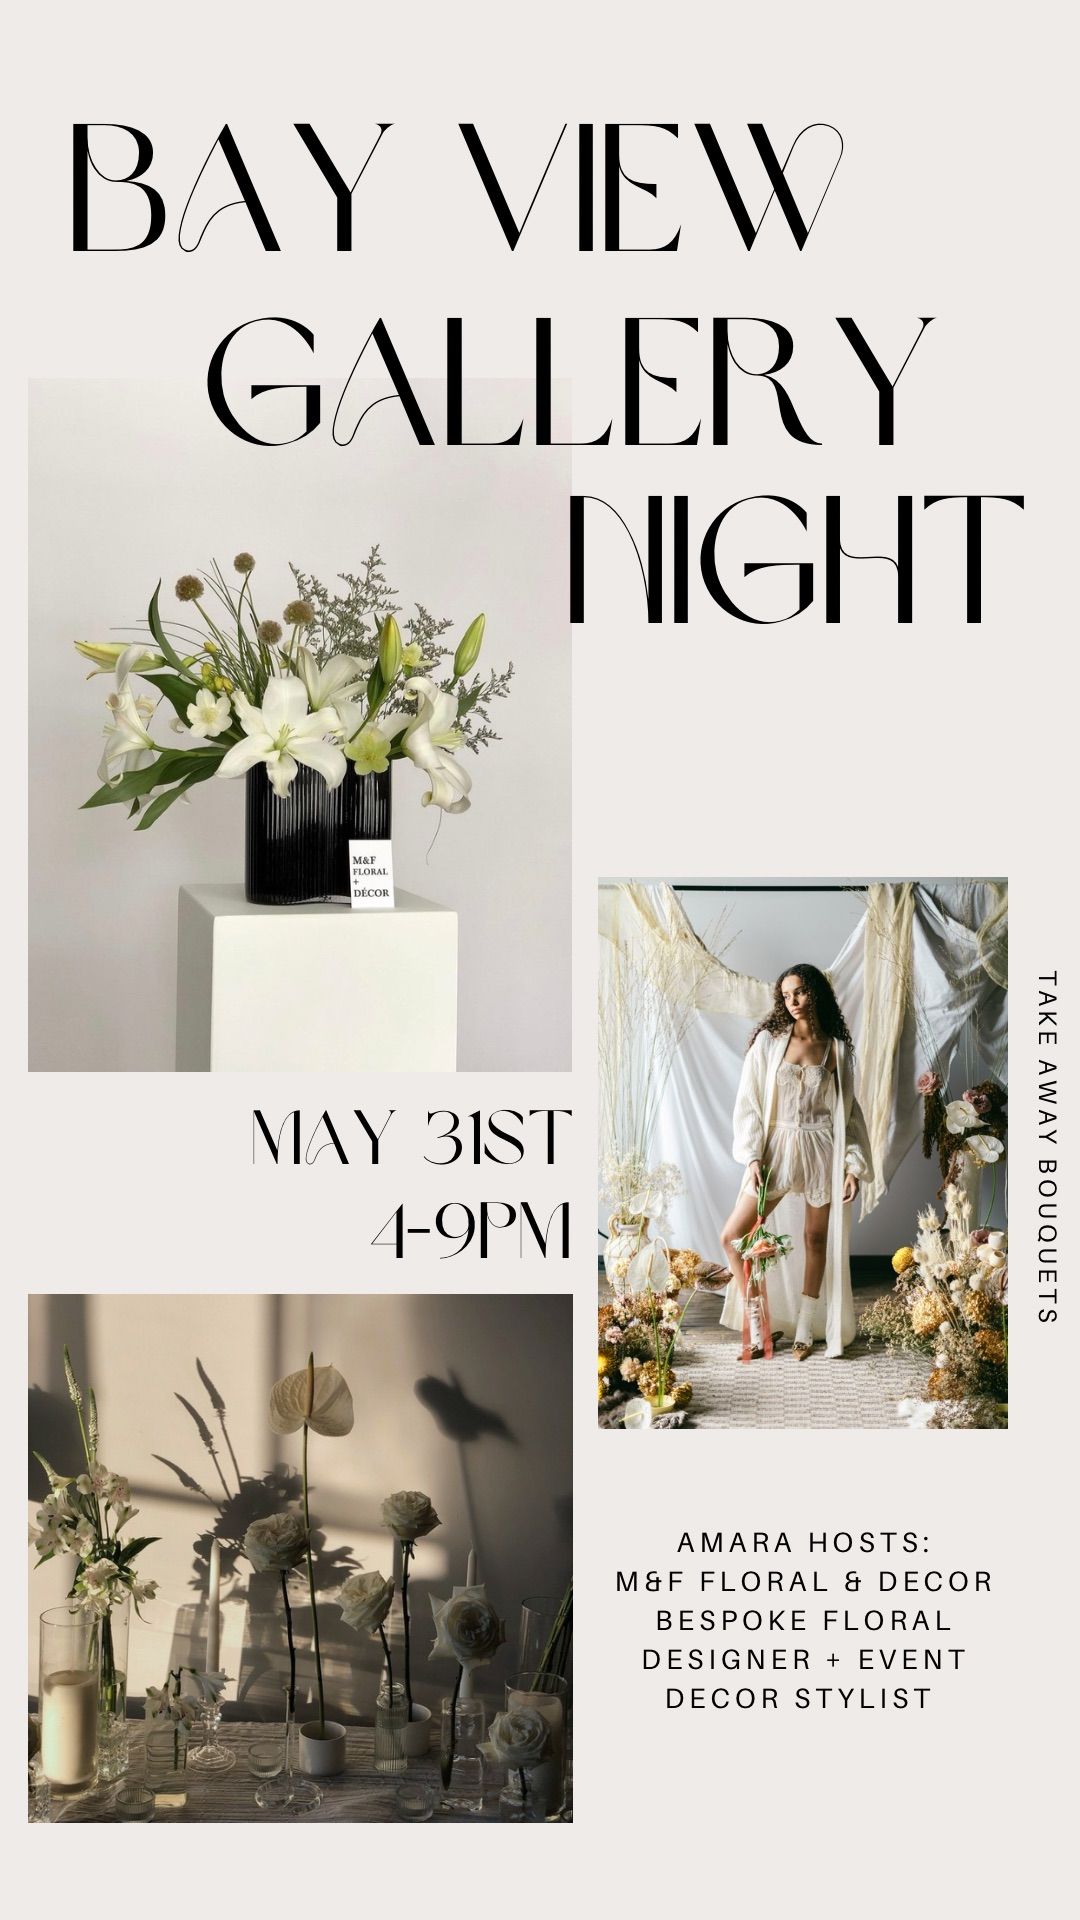 Bay View Gallery Night at Amara Studios with M&F Floral + Decor 